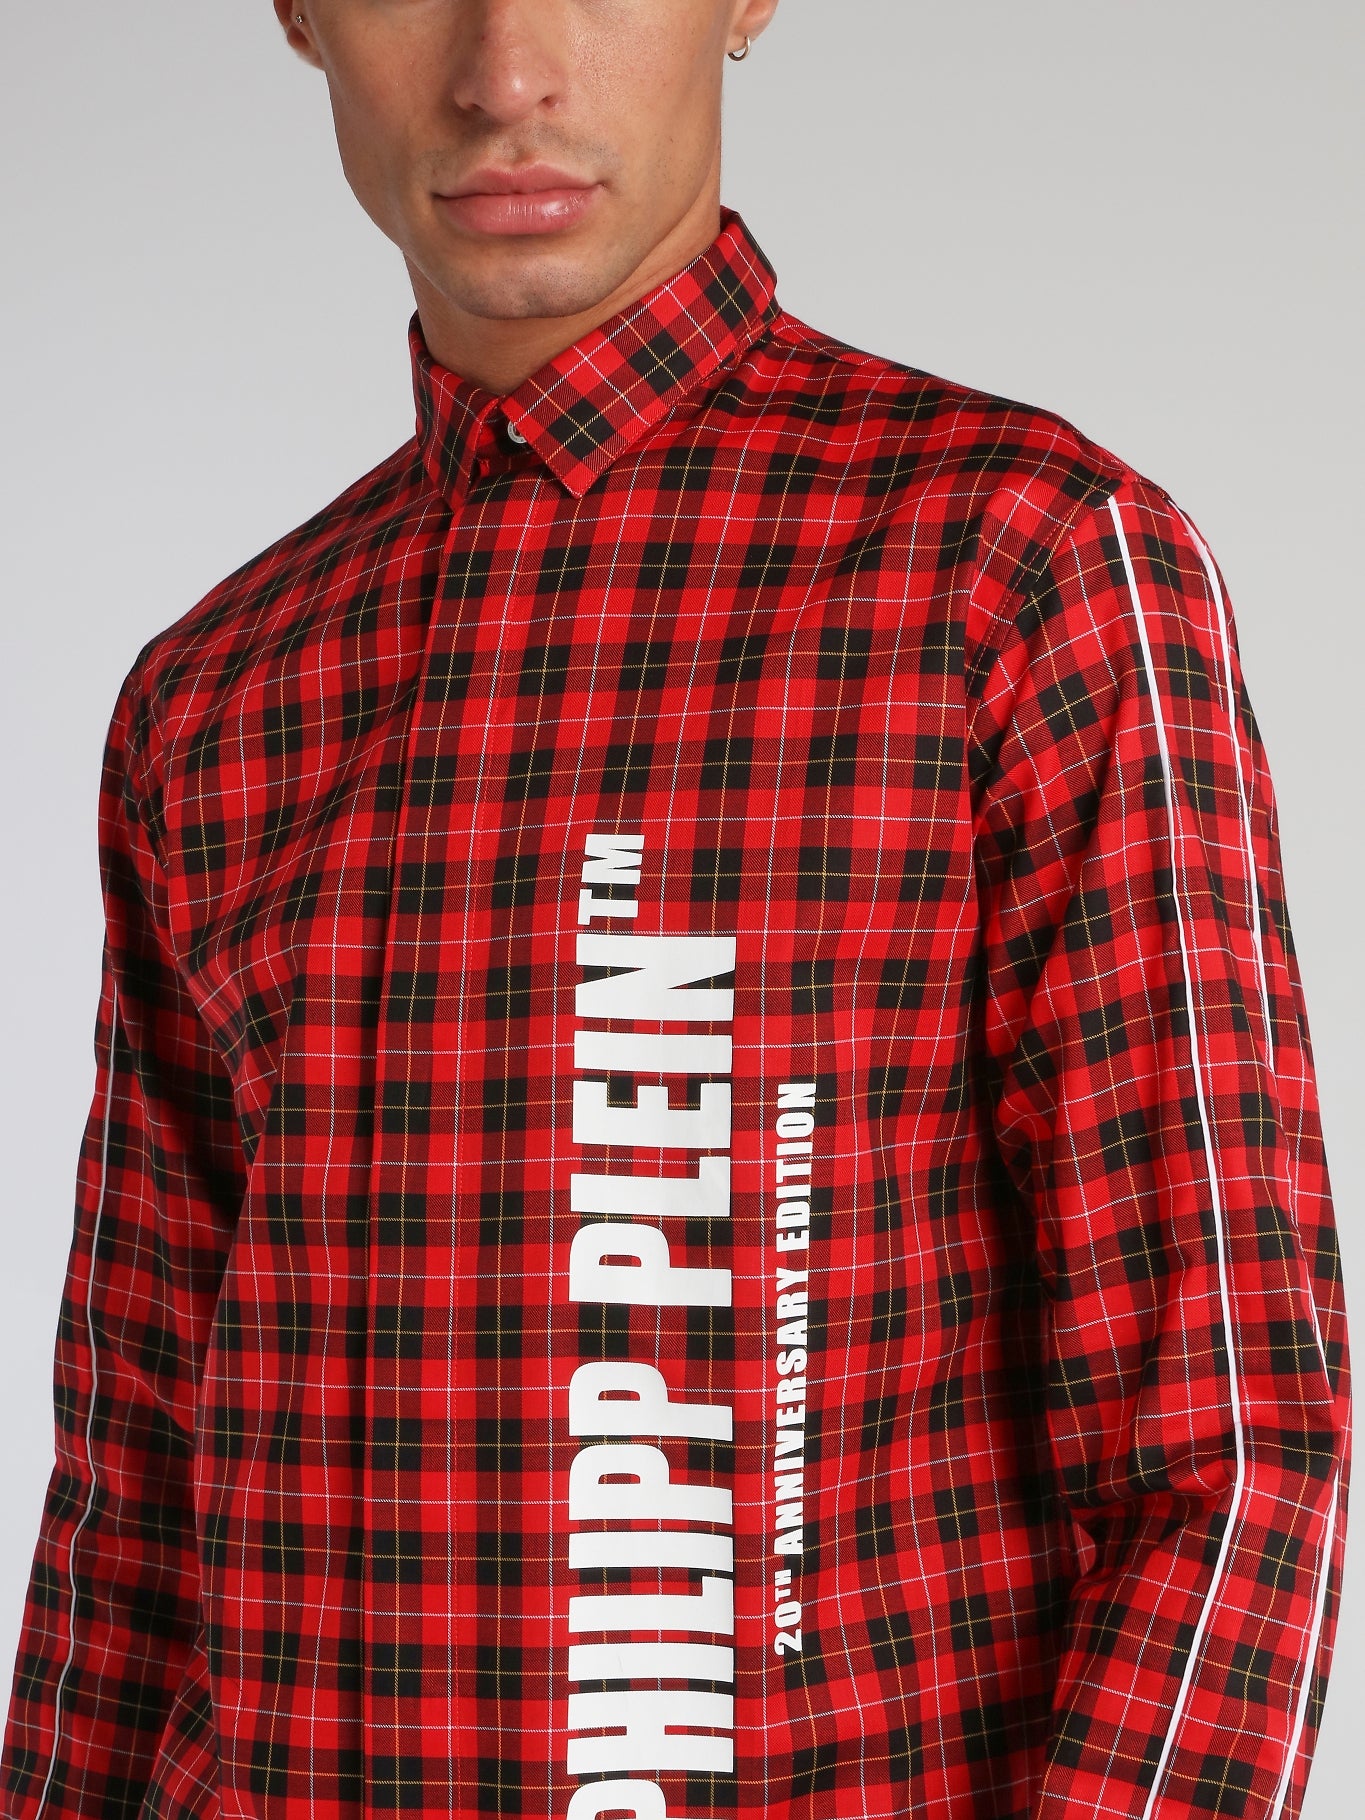 Red Check Button Up Shirt